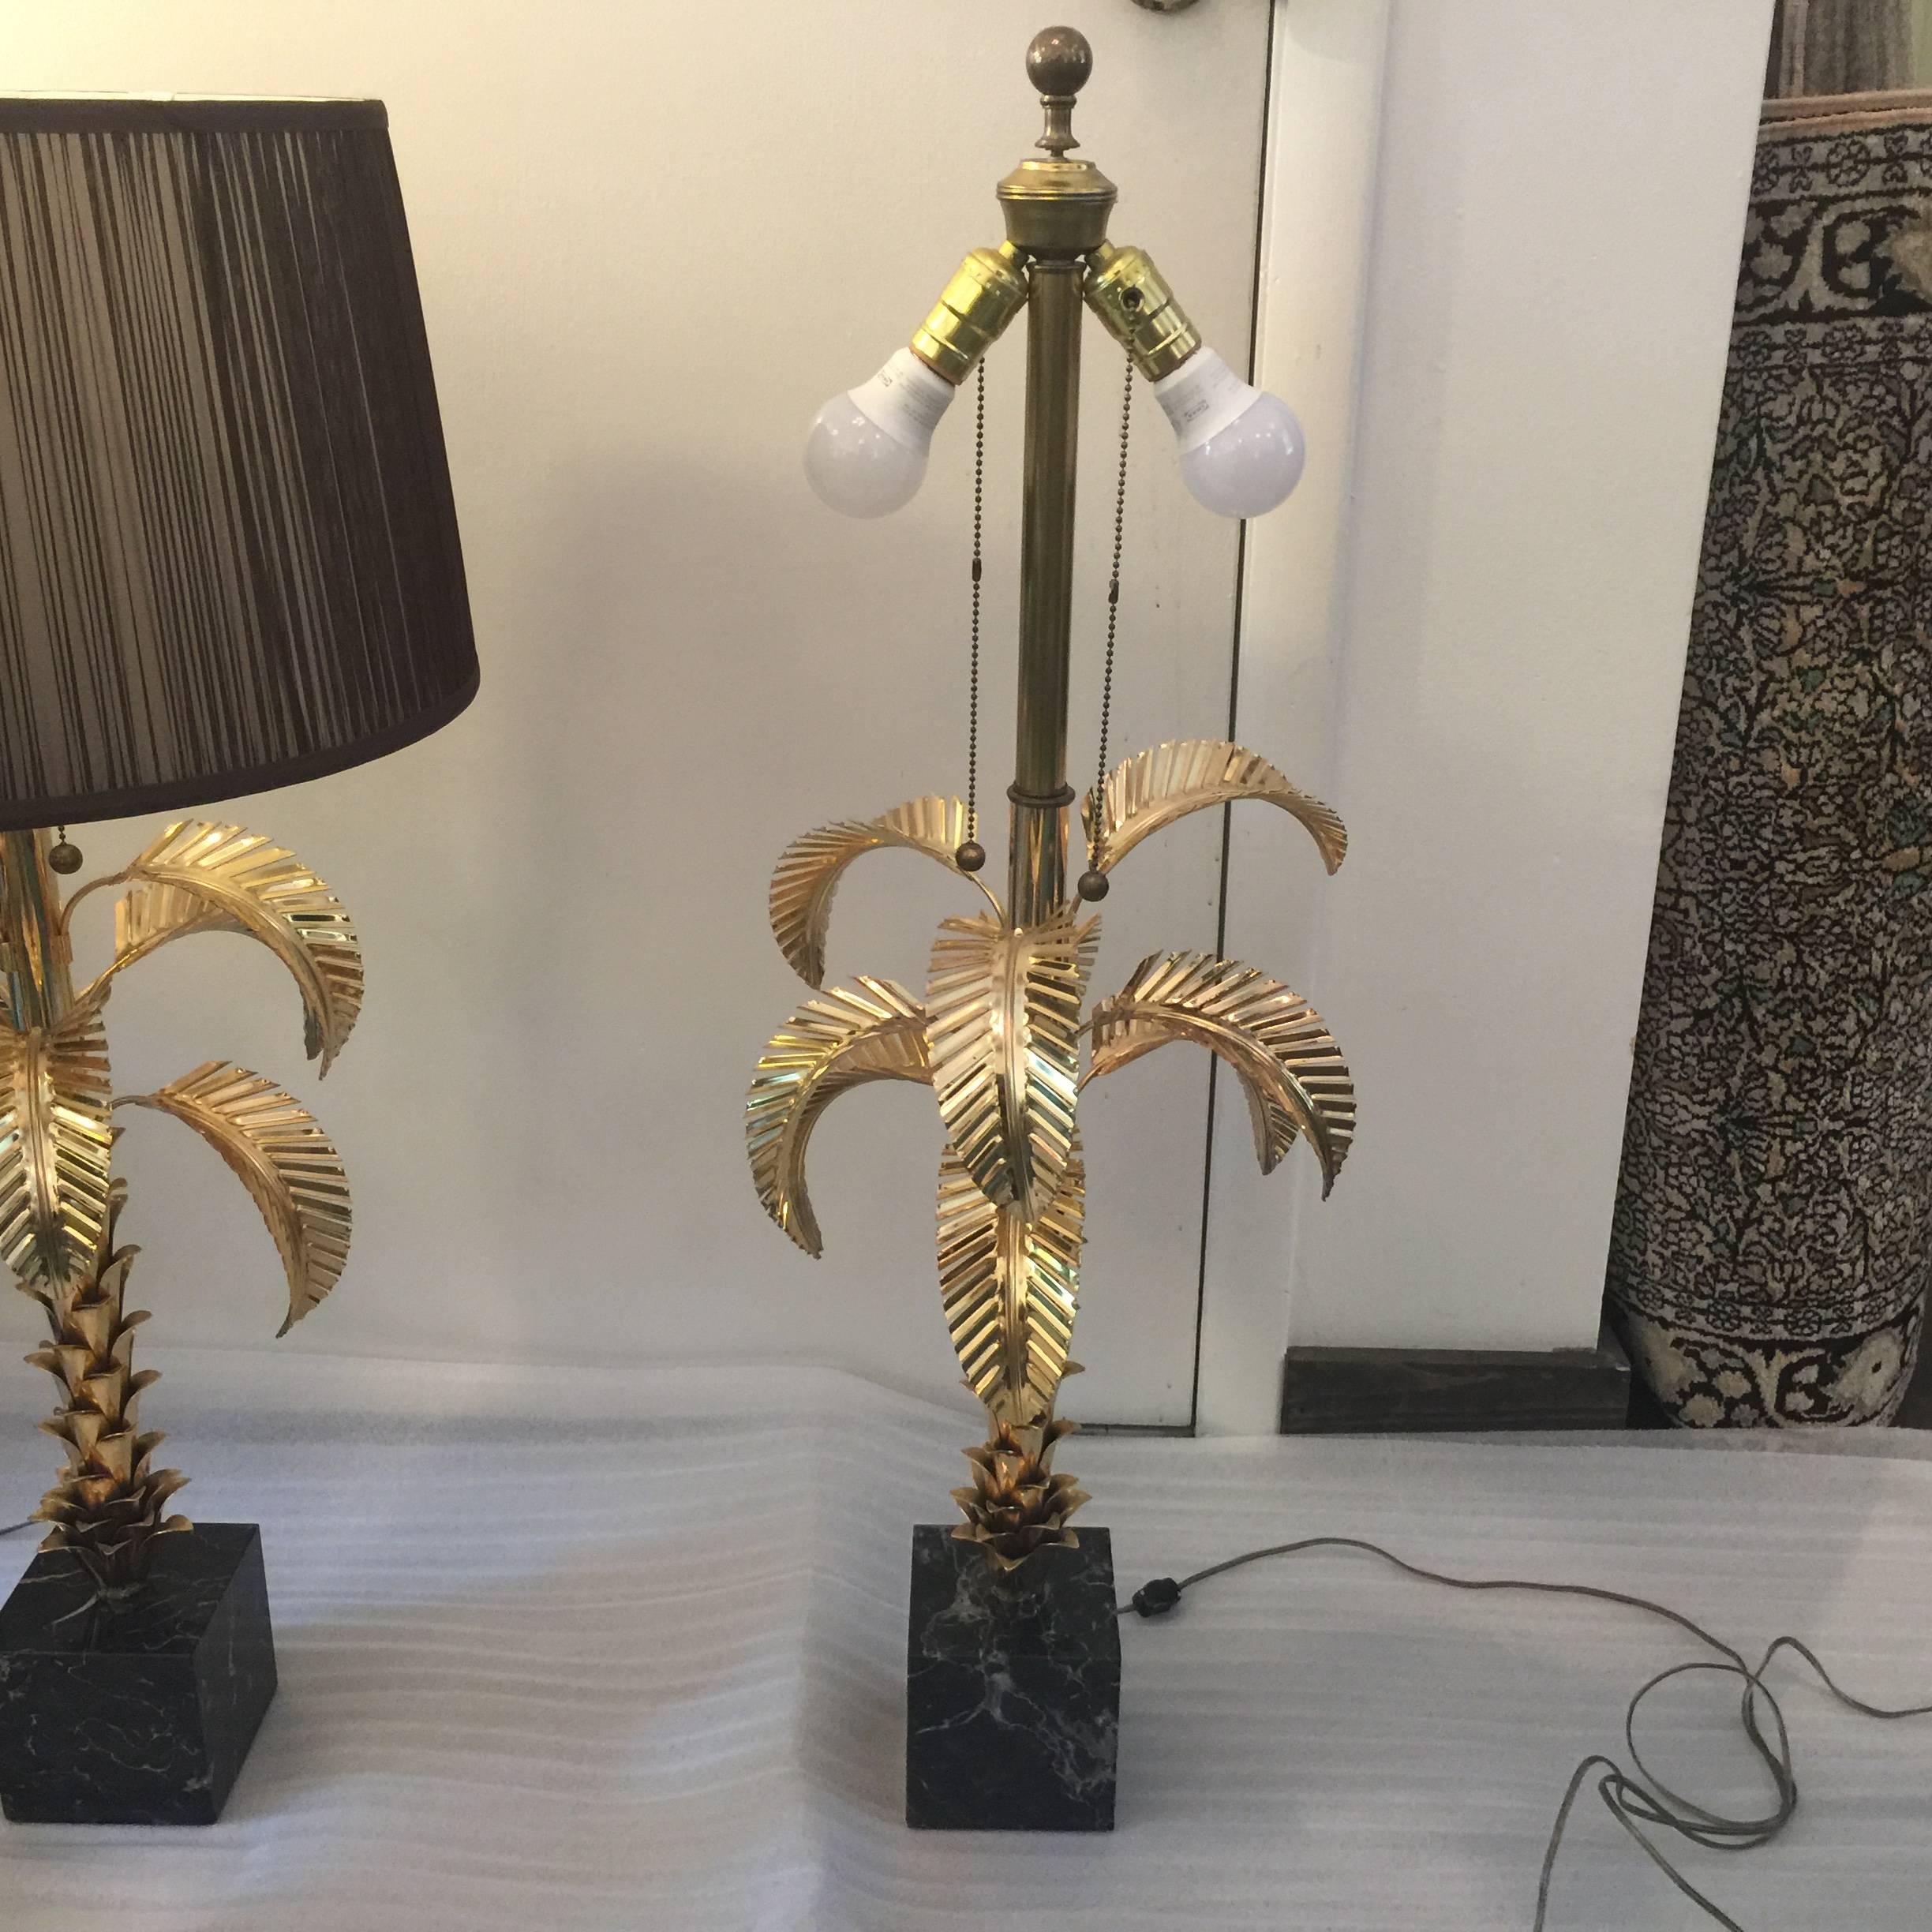 Mounted on black marble, these exceptionally detailed gold-plated on metal table lamps in style of large-scale palm trees. Pleated brown silk shades not included (sold separately). Double sockets.